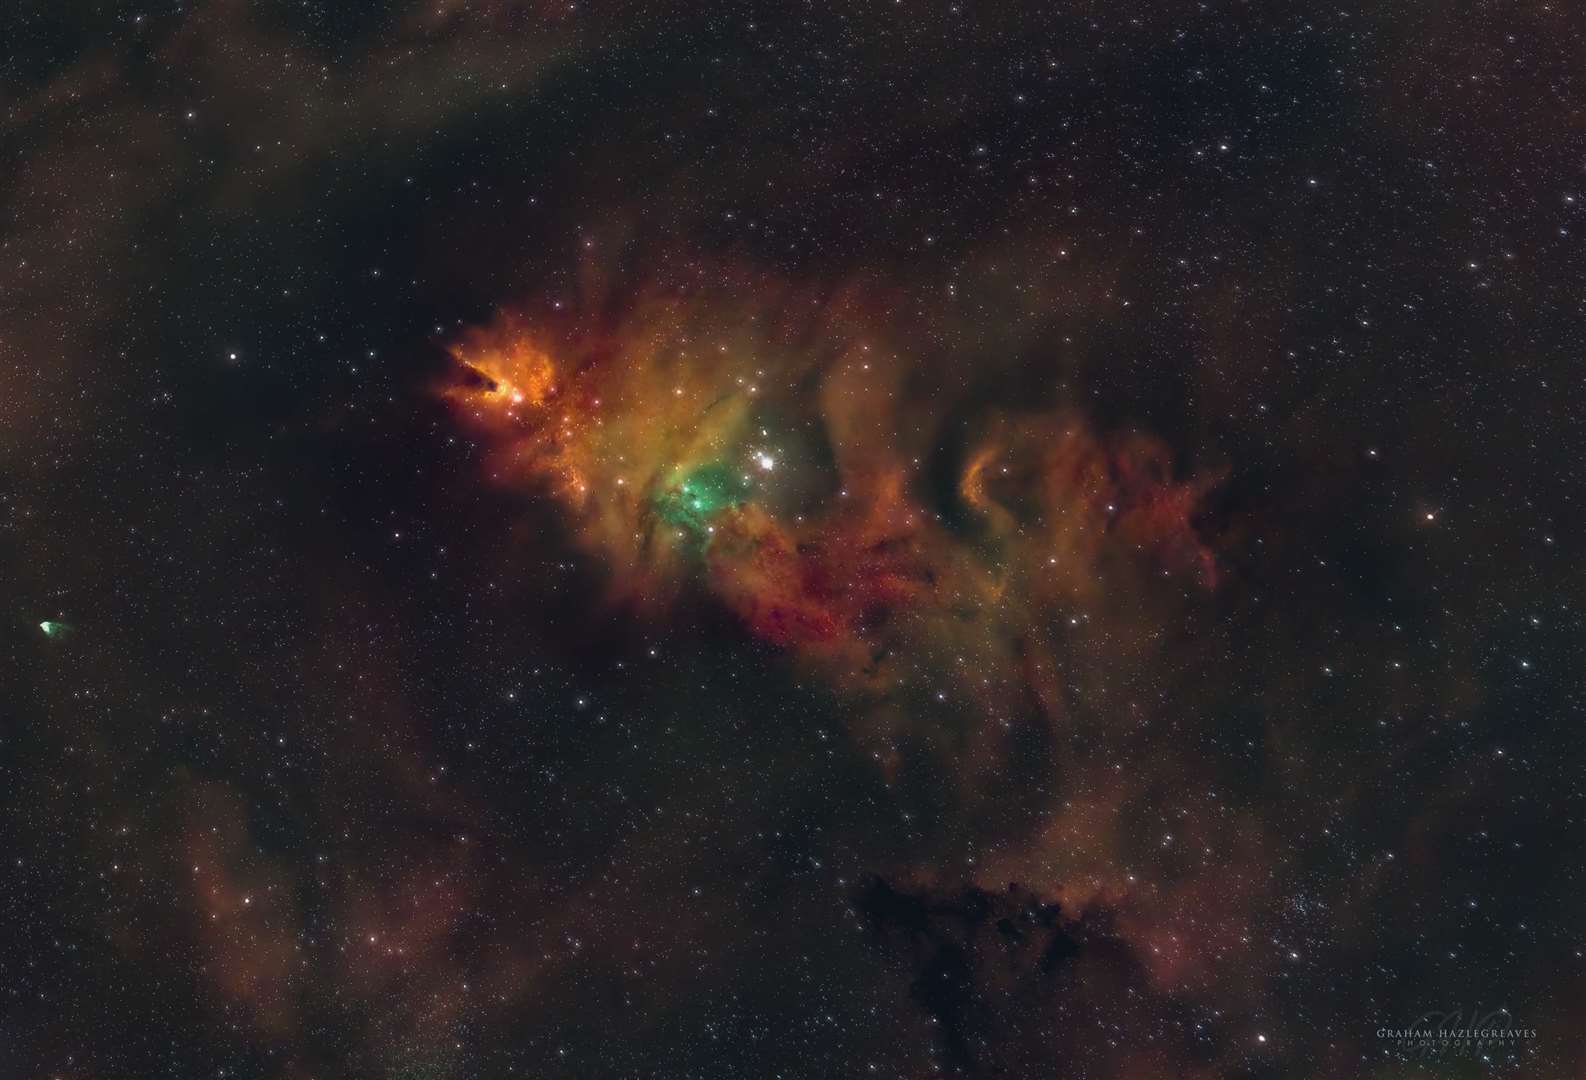 The Cone Nebula and Christmas Tree cluster lie some 2,350 light years from earth in the constellation of Monoceros. It is an emission nebula and star cluster – the colour green shows the oxygenrich gas clouds, red the hydrogen rich areas and the ambers/orange are sulphur rich dust clouds.